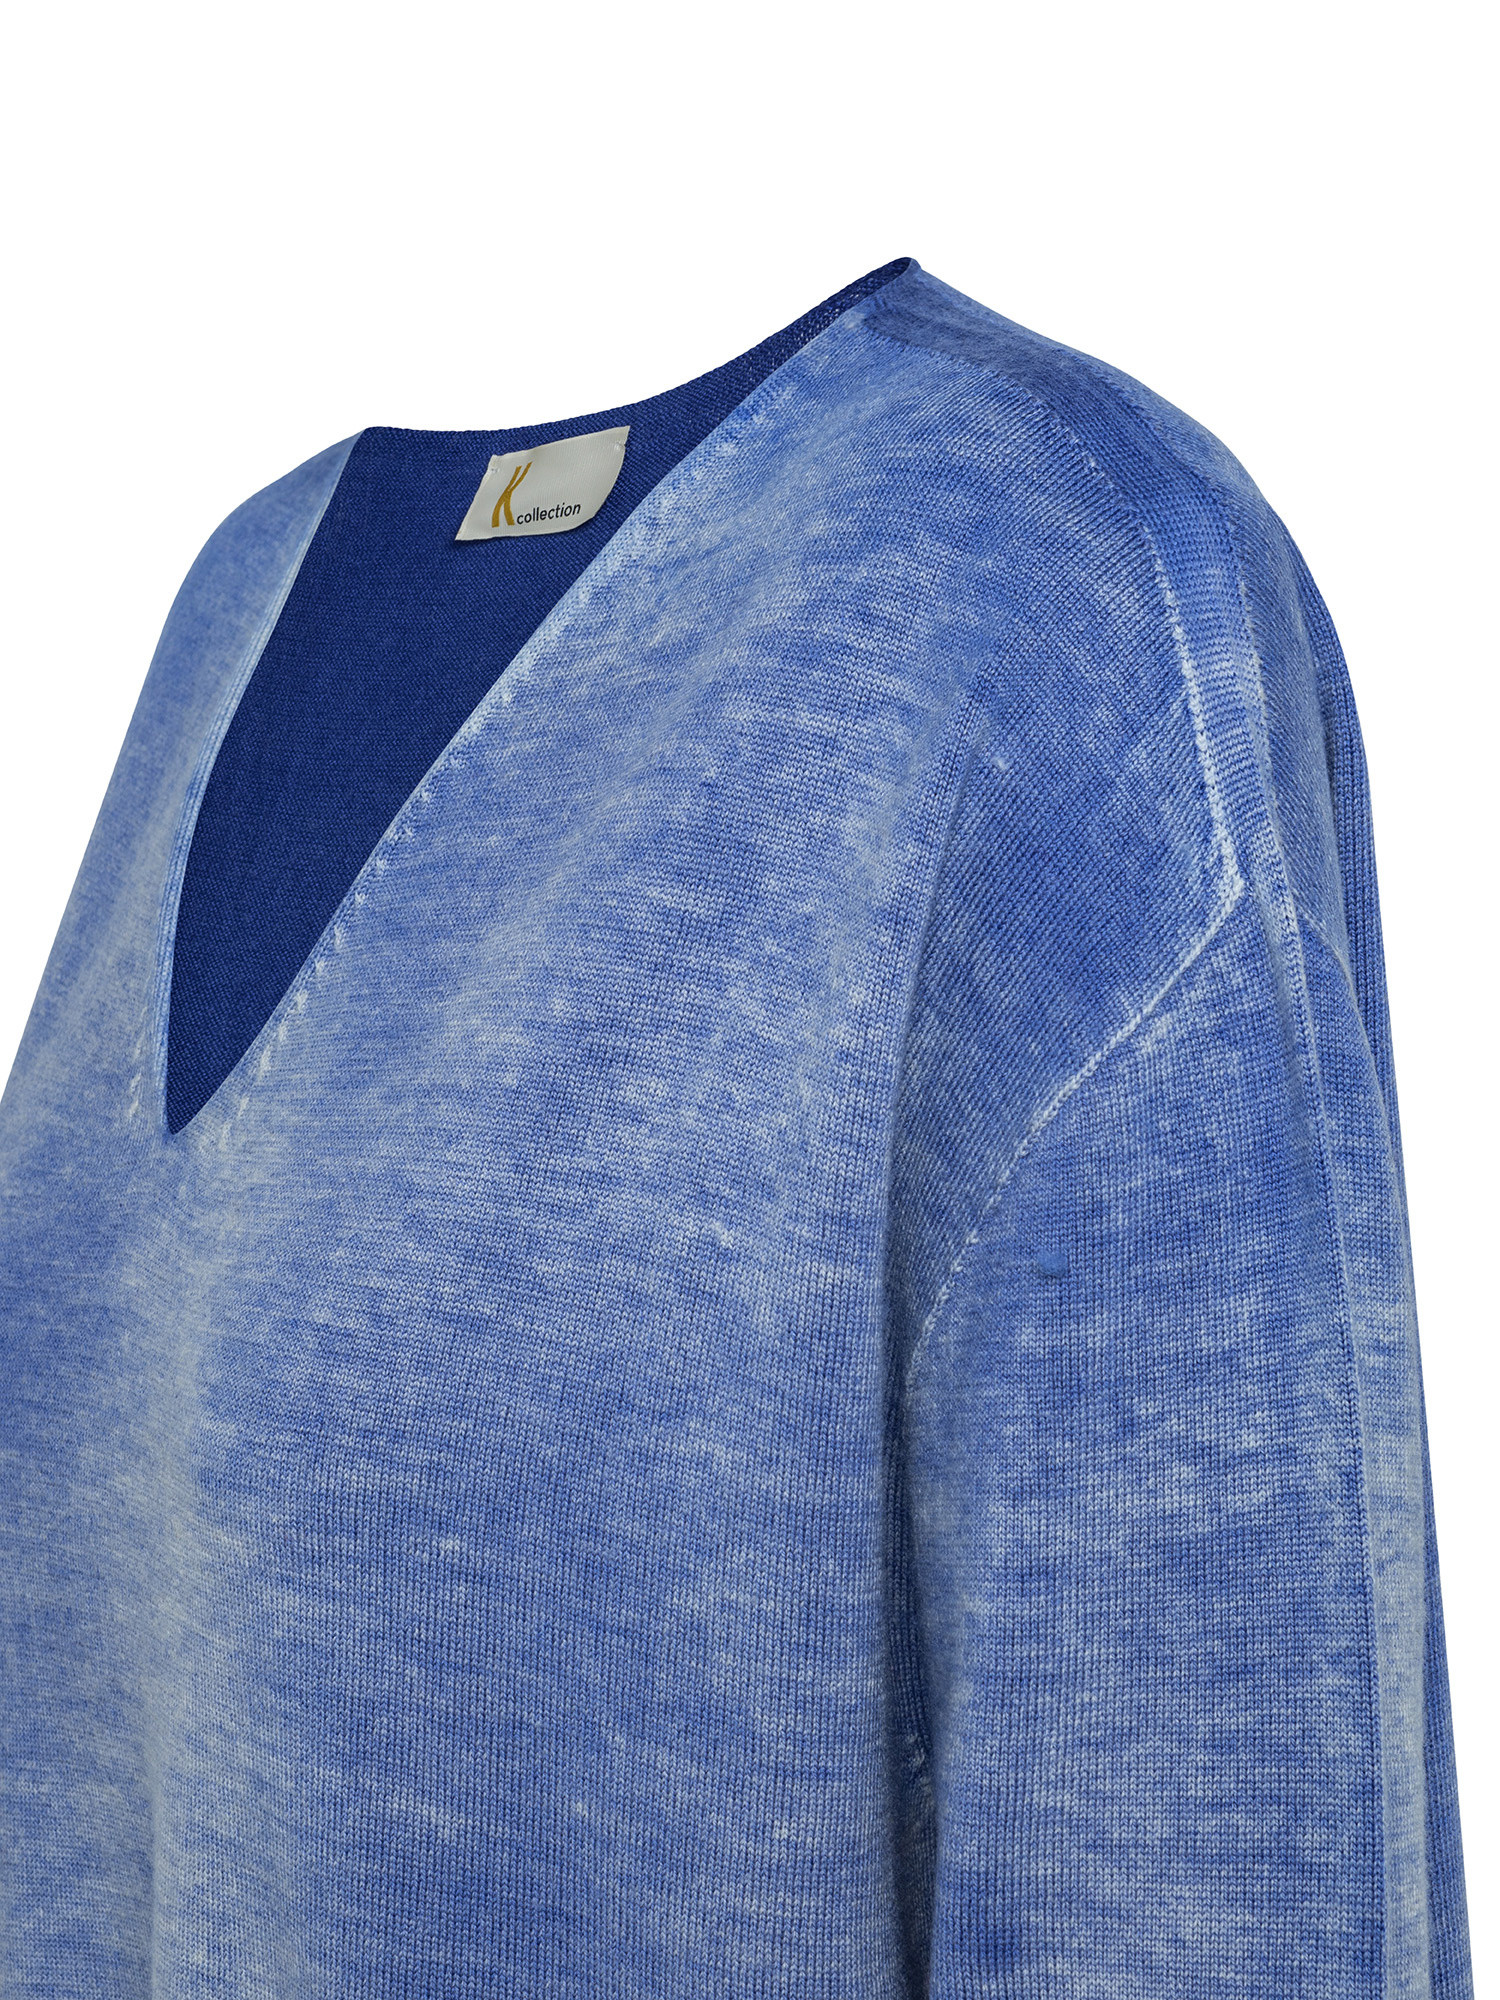 K Collection - V-neck sweater in extrafine wool, Blue, large image number 2